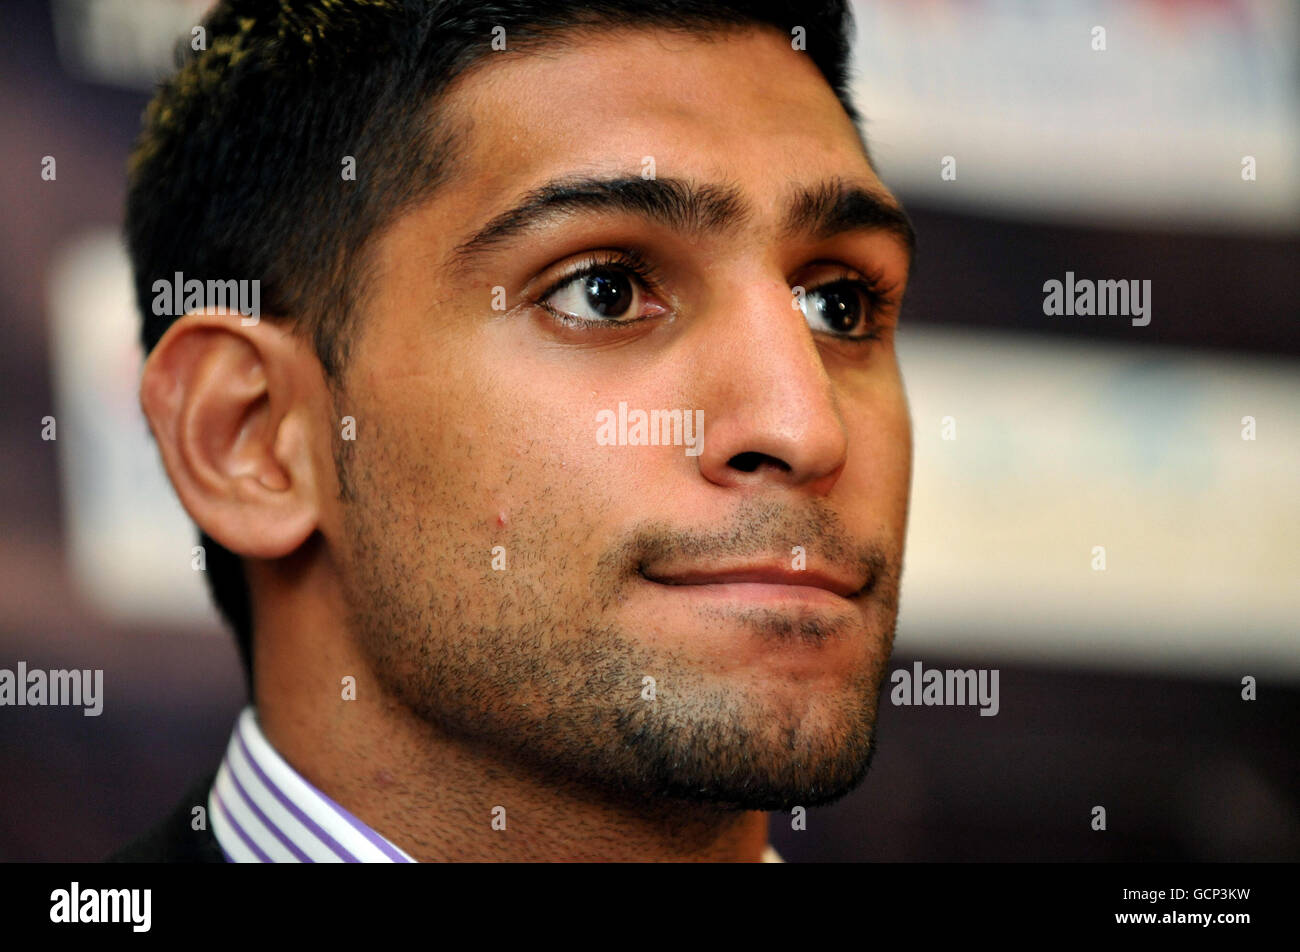 RETRANSMITTED WITH ADDITIONAL INFORMATION WBA Super Lightweight World Champion Amir Khan during the press conference at Planet Hollywood, London. Stock Photo